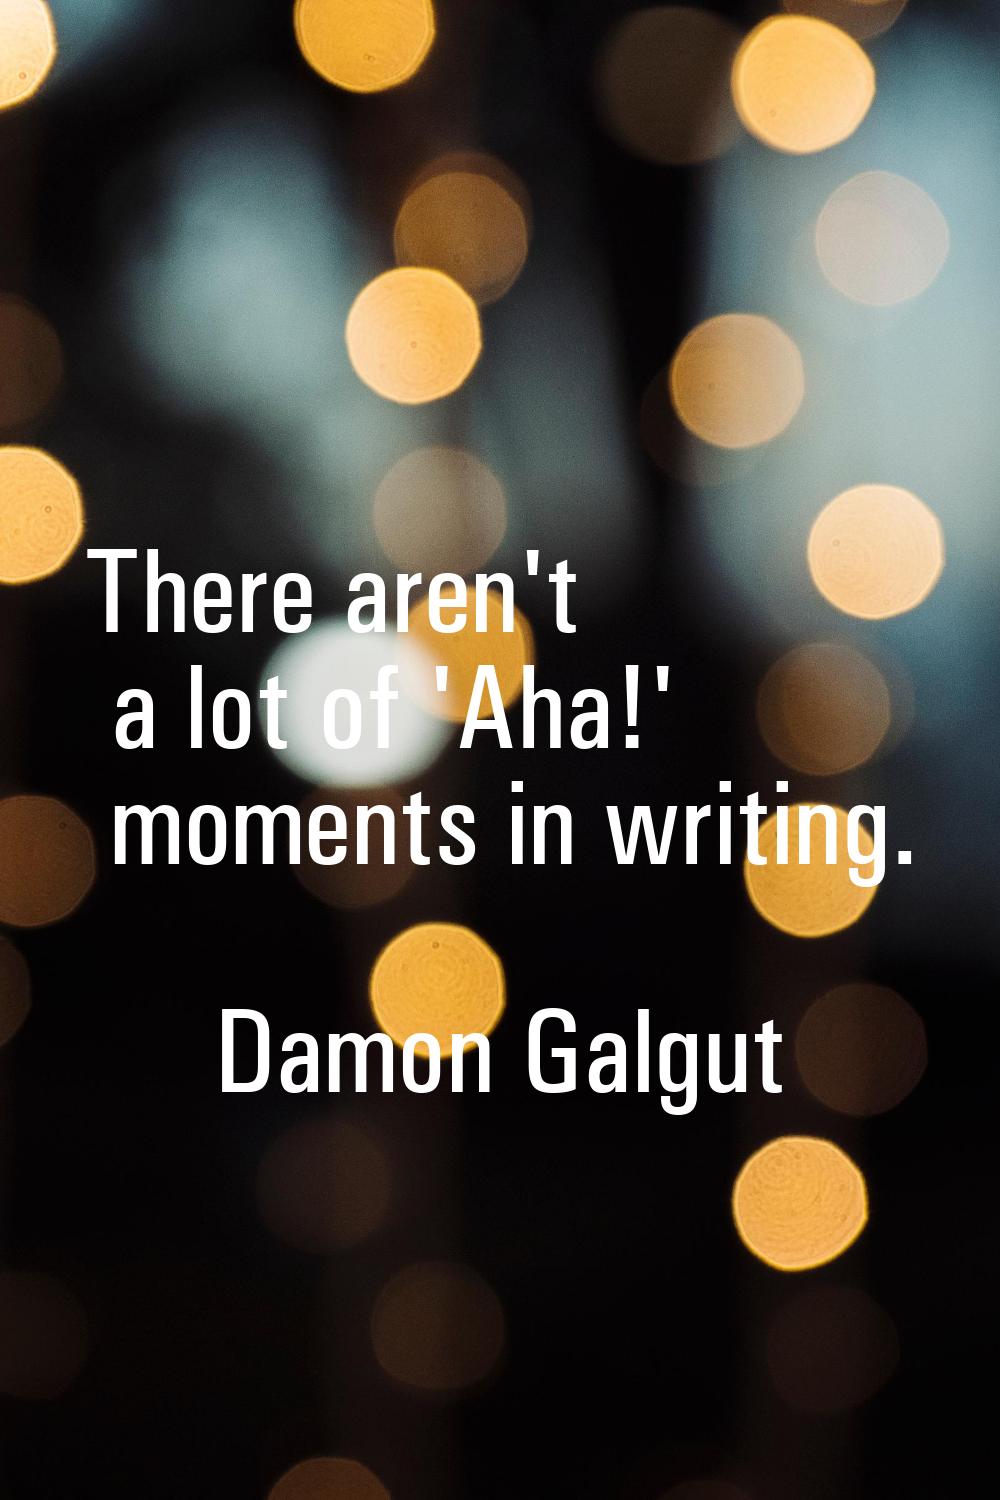 There aren't a lot of 'Aha!' moments in writing.